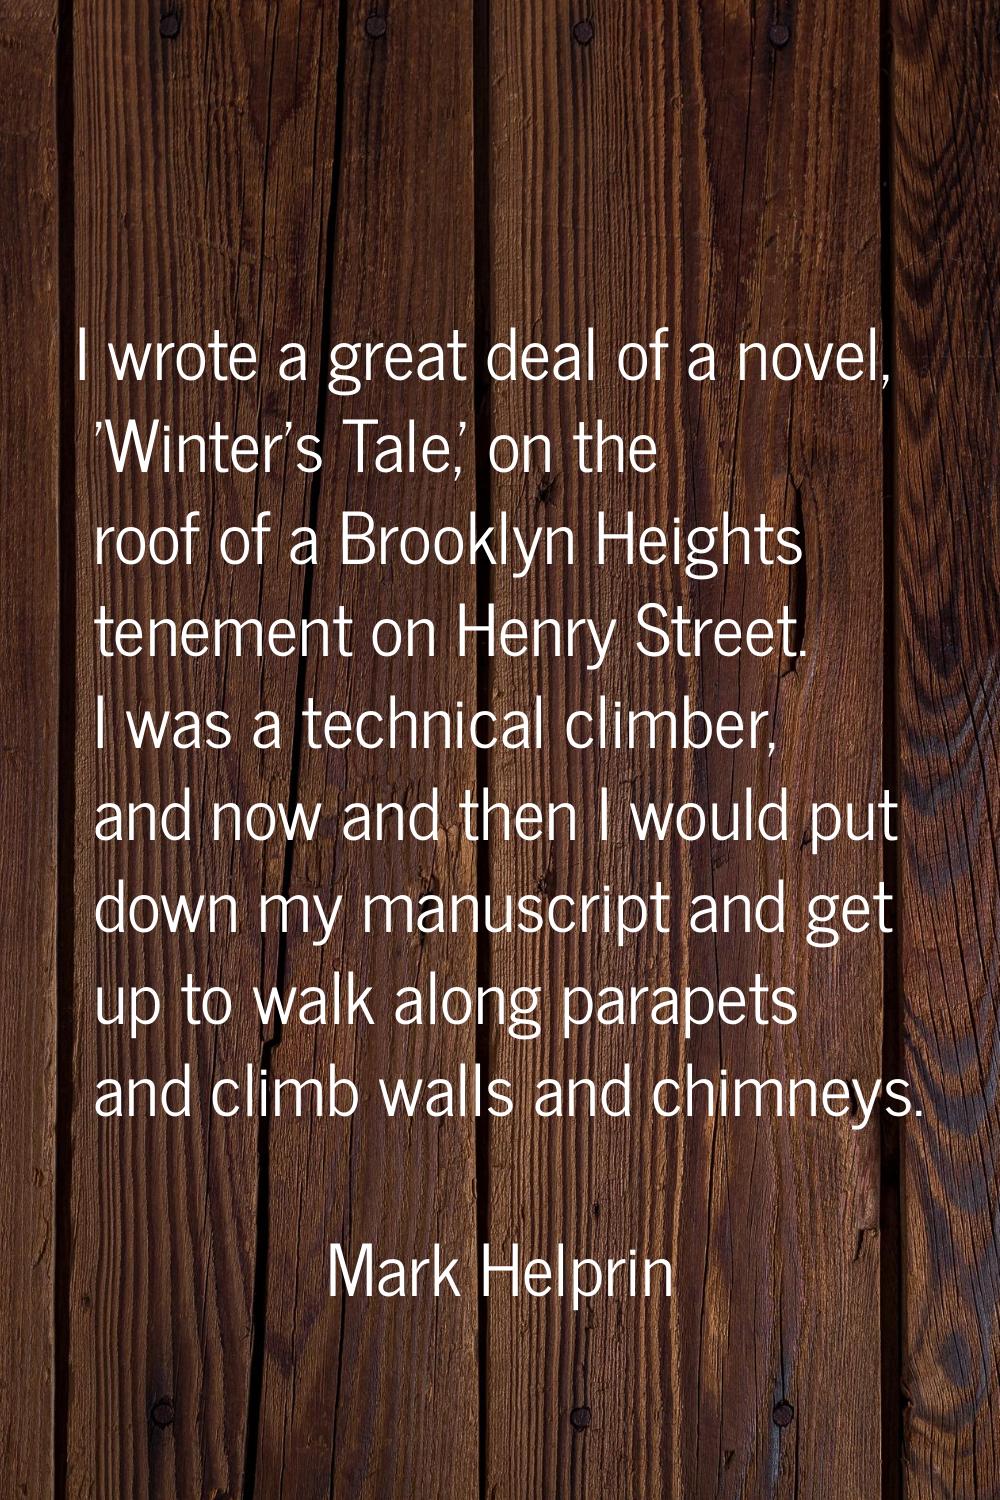 I wrote a great deal of a novel, 'Winter's Tale,' on the roof of a Brooklyn Heights tenement on Hen